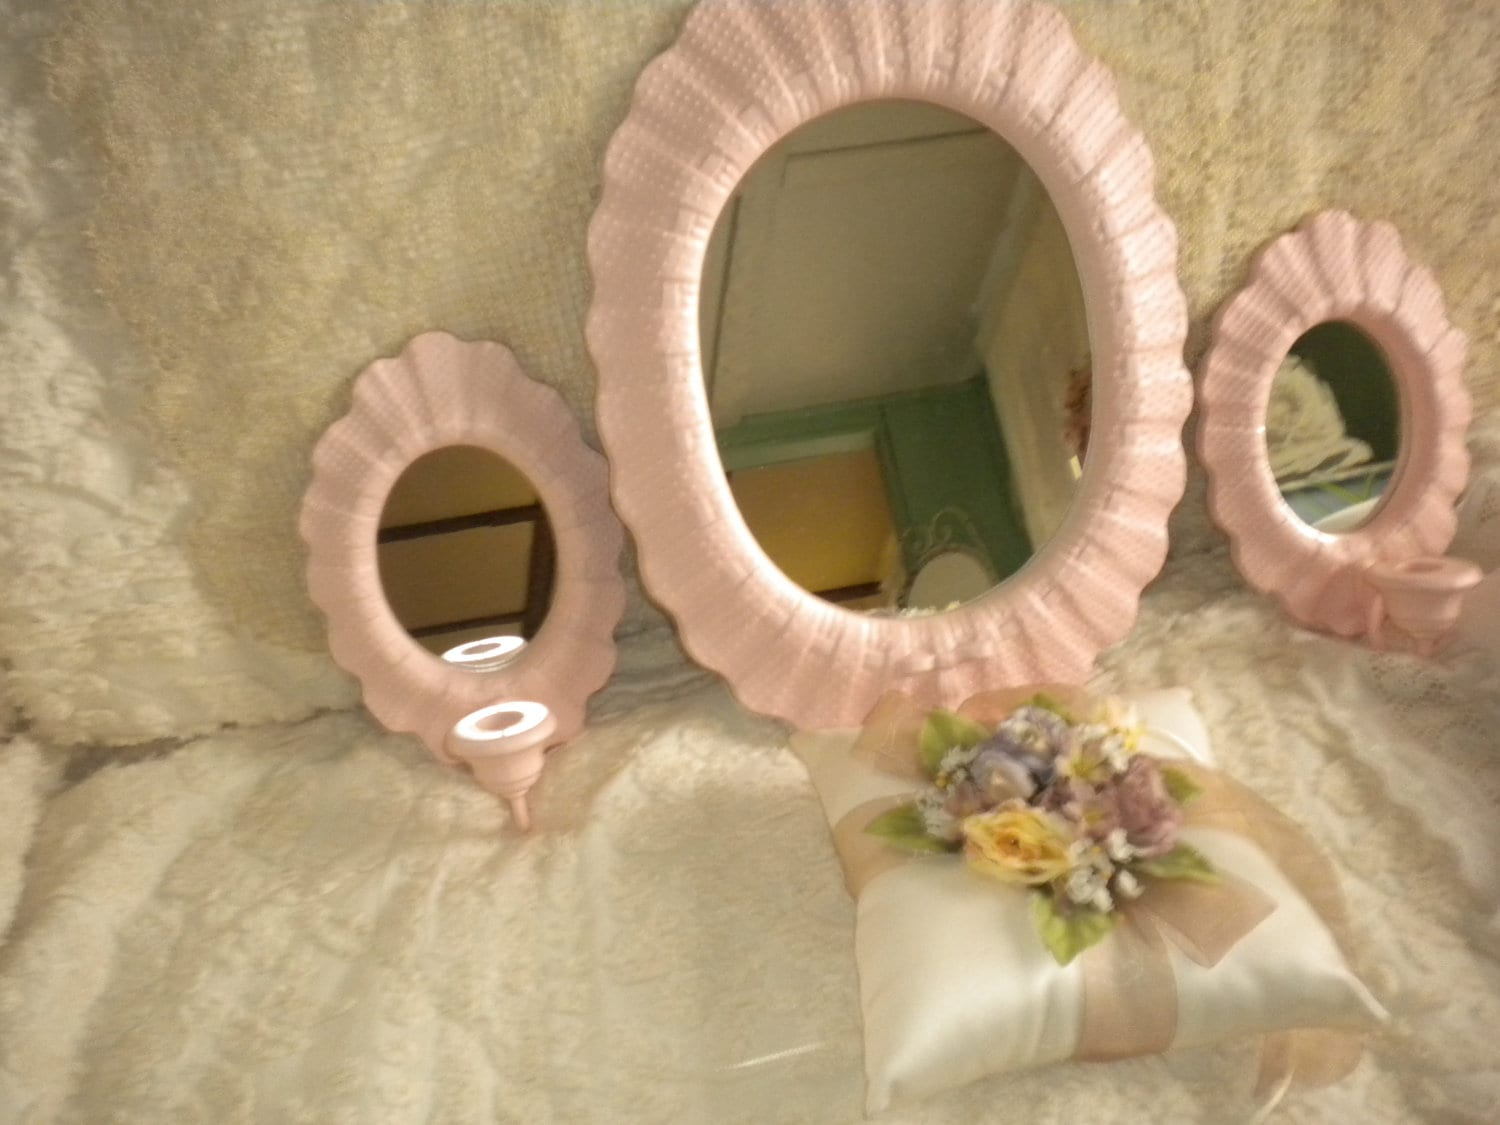 SALELovely 3 piece Mirror Sconce SetShabby by HitOrMissTreasures